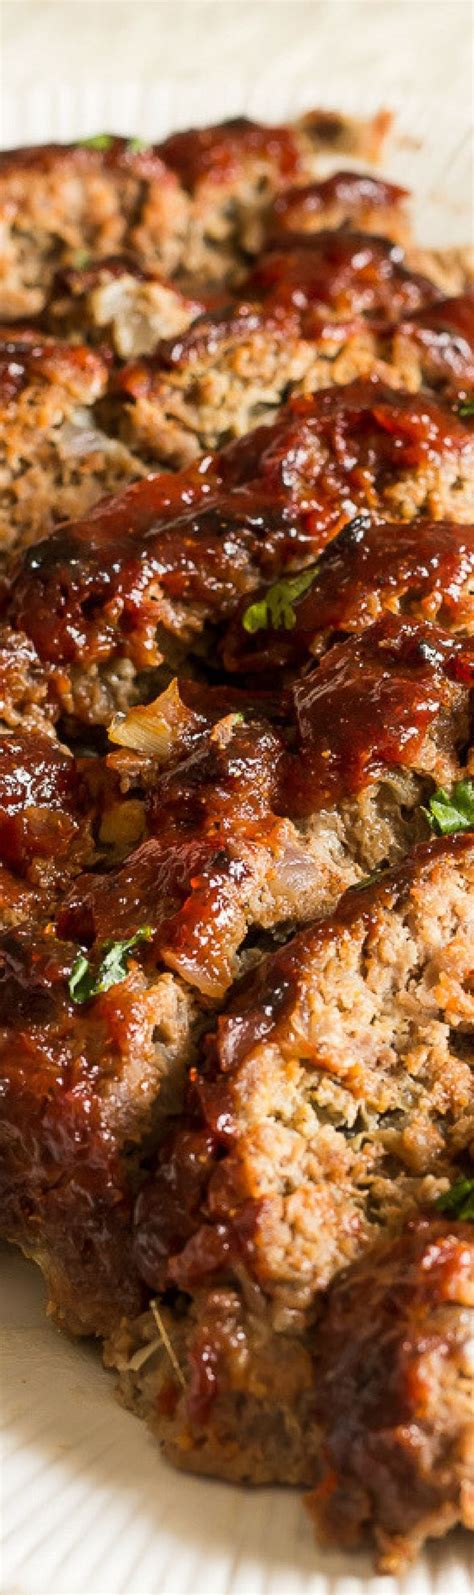 It's satisfying and extremely easy to make! Best 2 Lb Meatloaf Recipes - Doing my best for Him: Vegetable and Turkey Meatloaf Recipe - It's ...